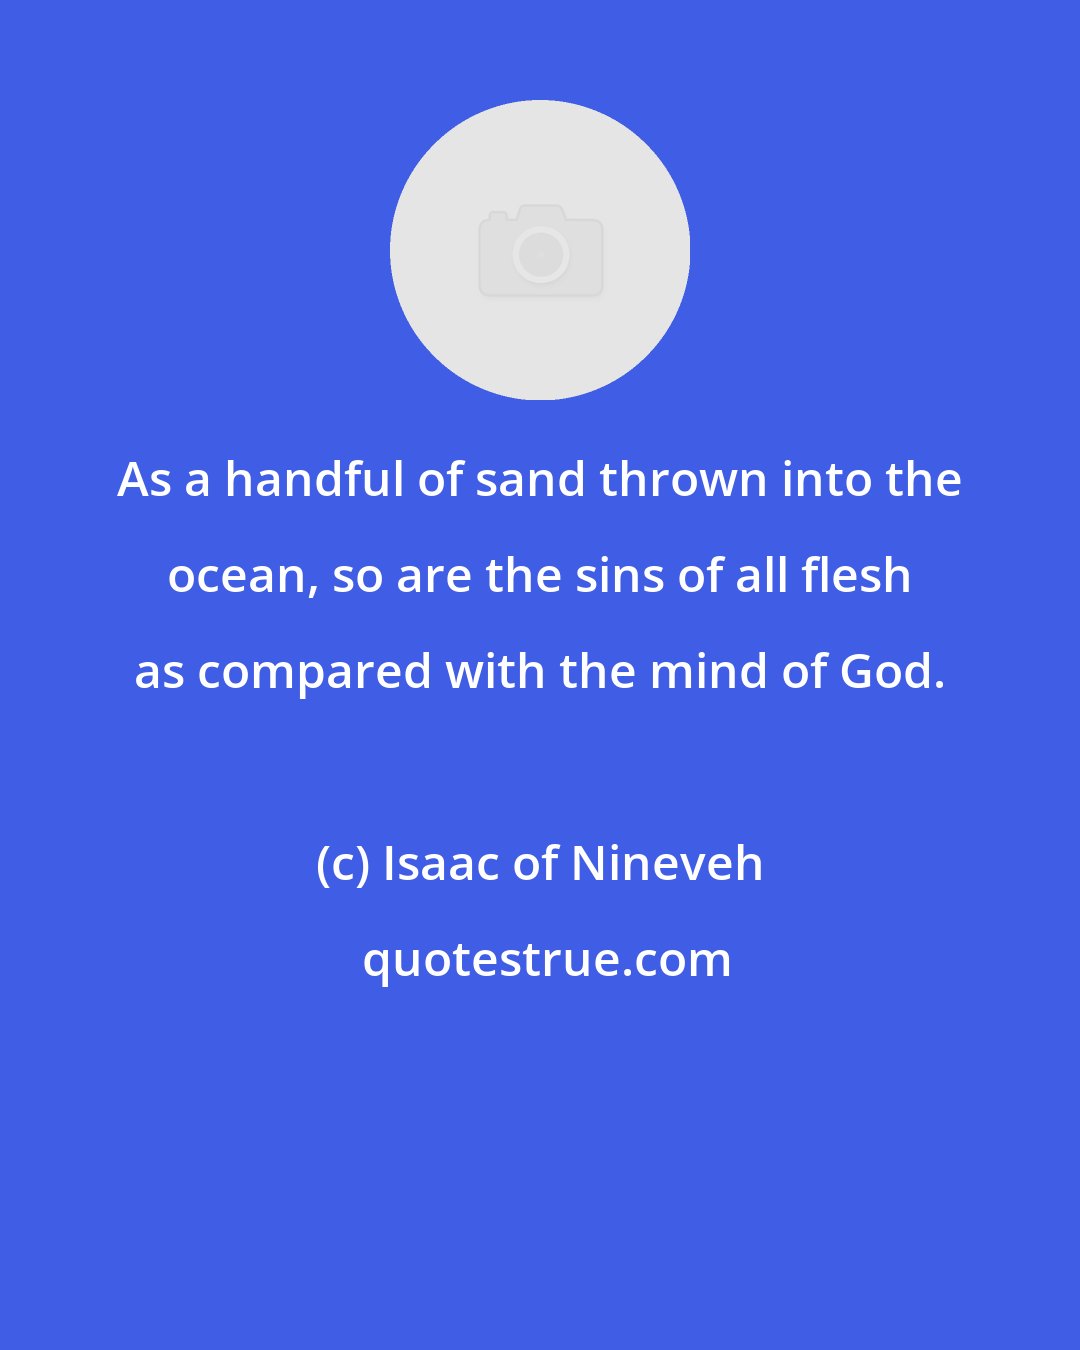 Isaac of Nineveh: As a handful of sand thrown into the ocean, so are the sins of all flesh as compared with the mind of God.